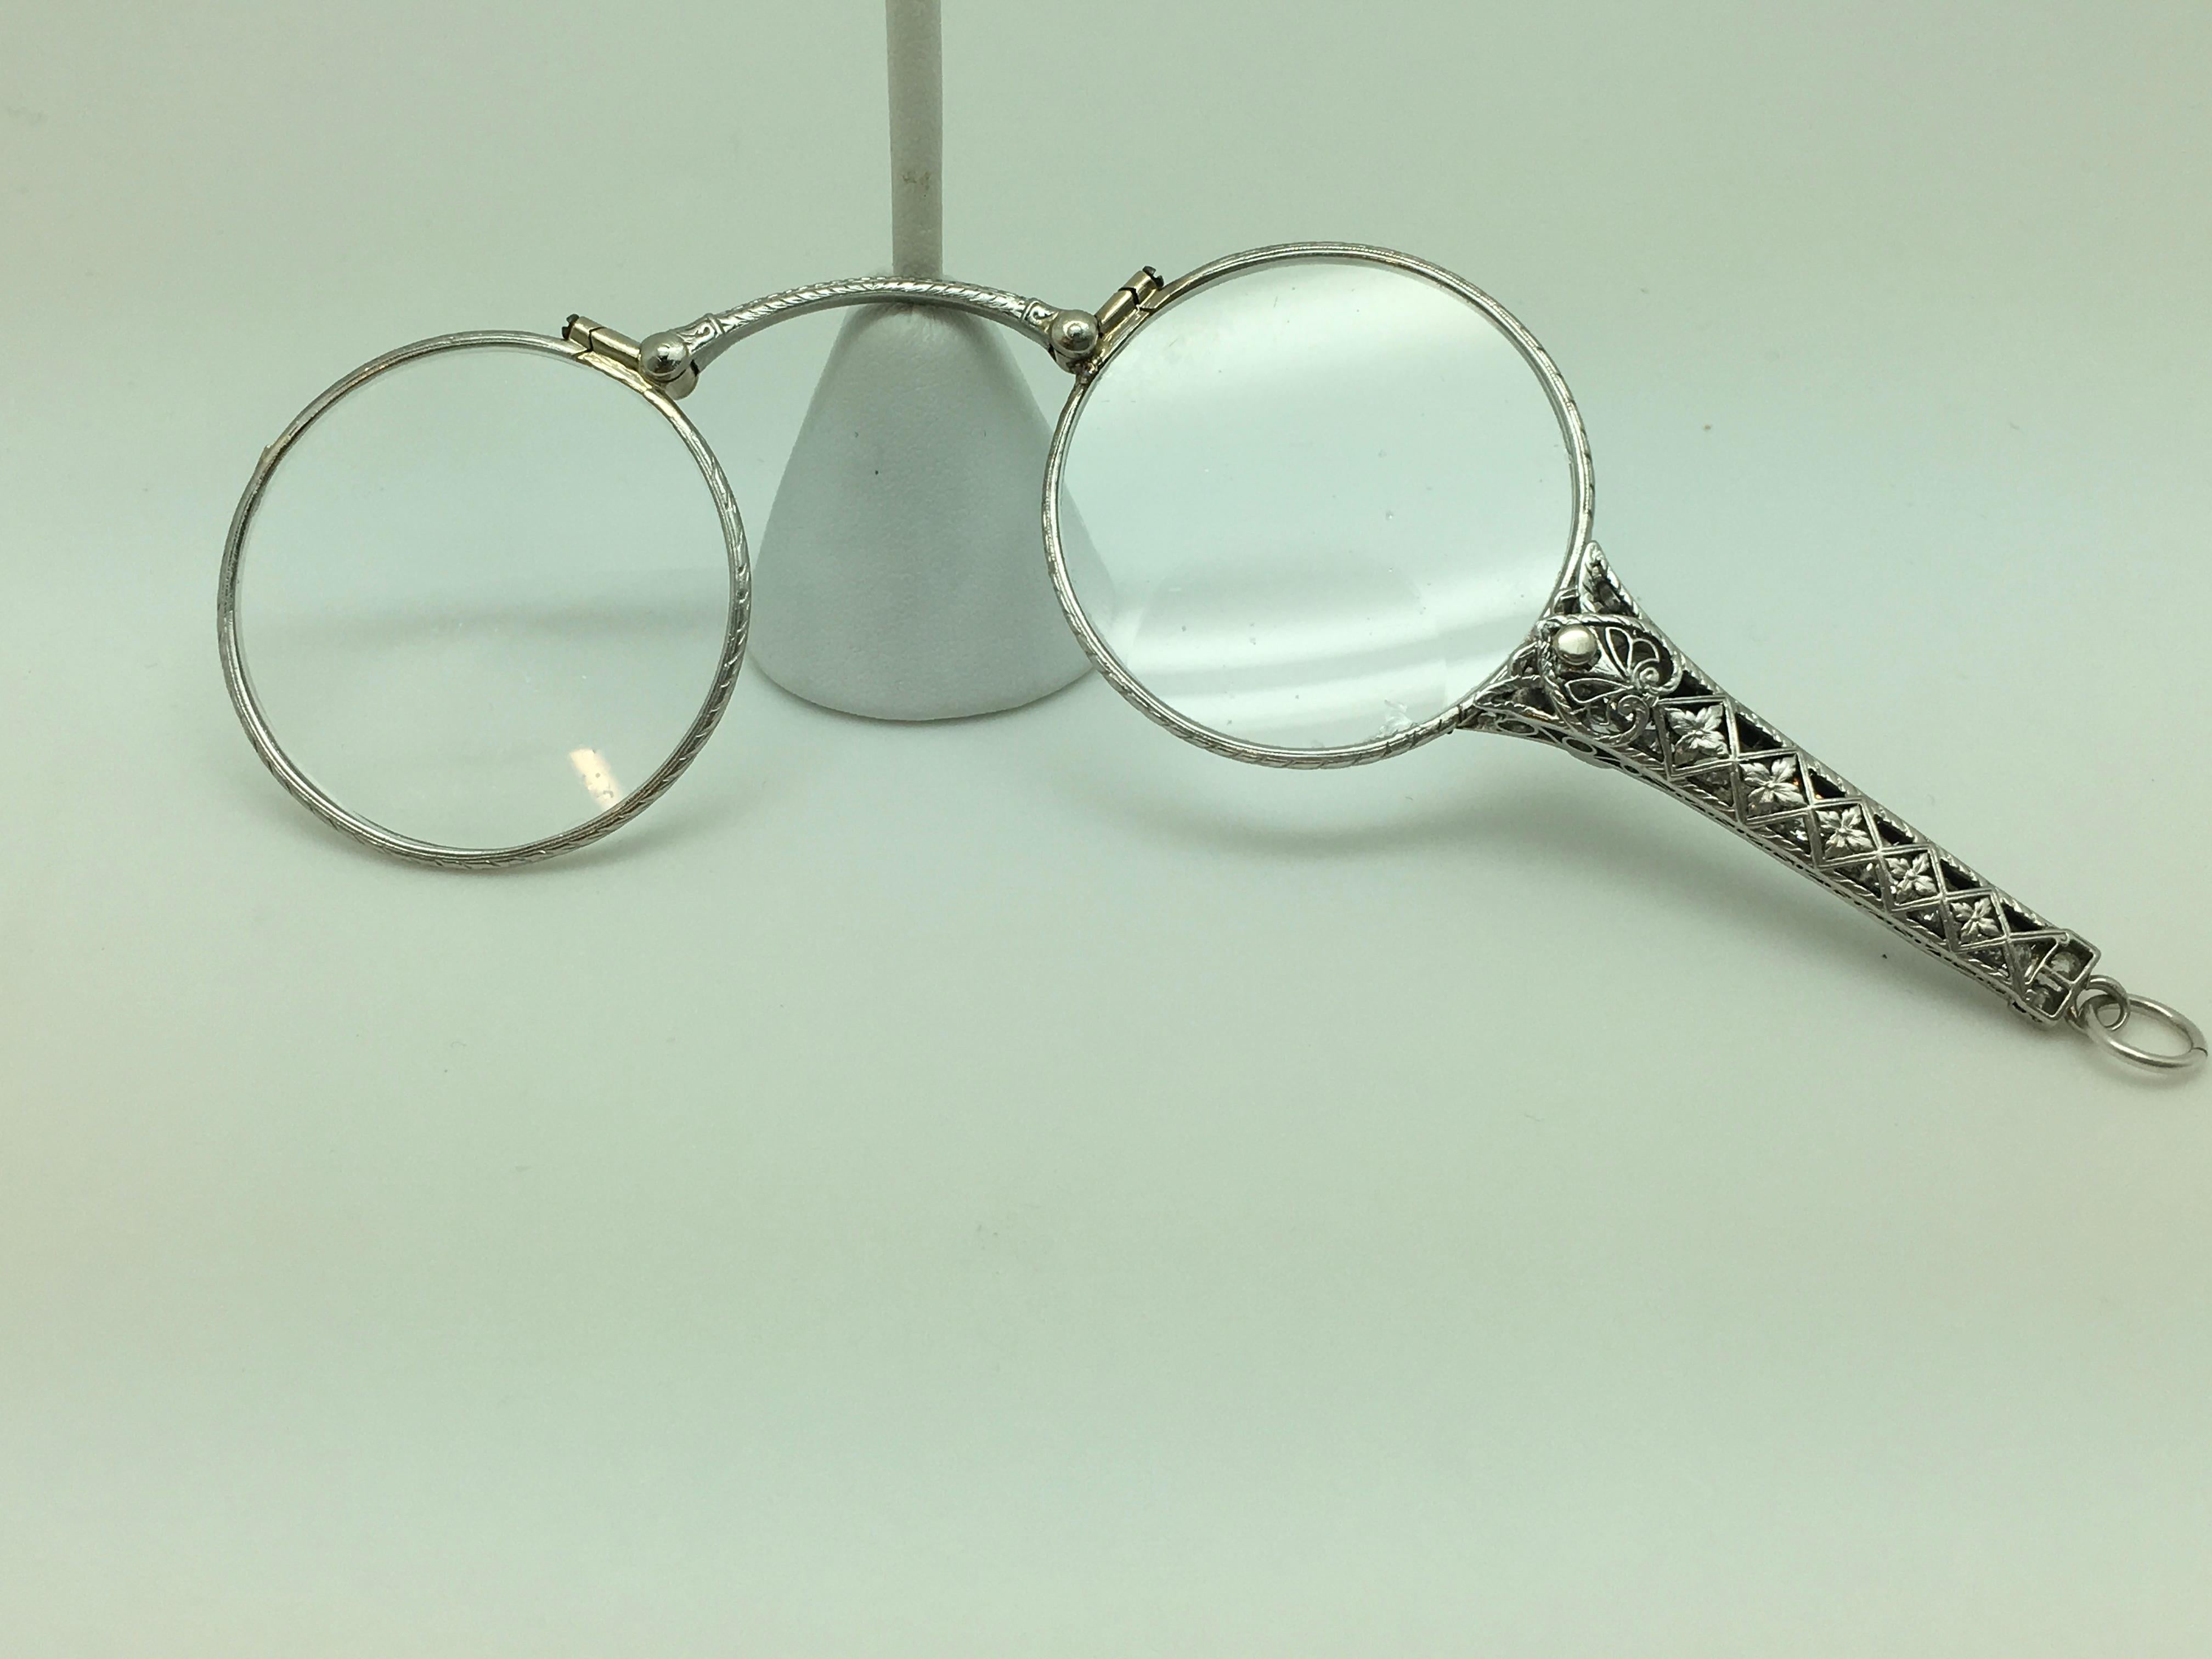 Lorgnette 
18 European Cut with 6 mixed cut, with 4 single and 2 Round Brilliant  Cut (located on either side of the major Diamond, near head of handle).
There are 20 total Diamonds for an approximate total combined Weight of 2.00 Carat by